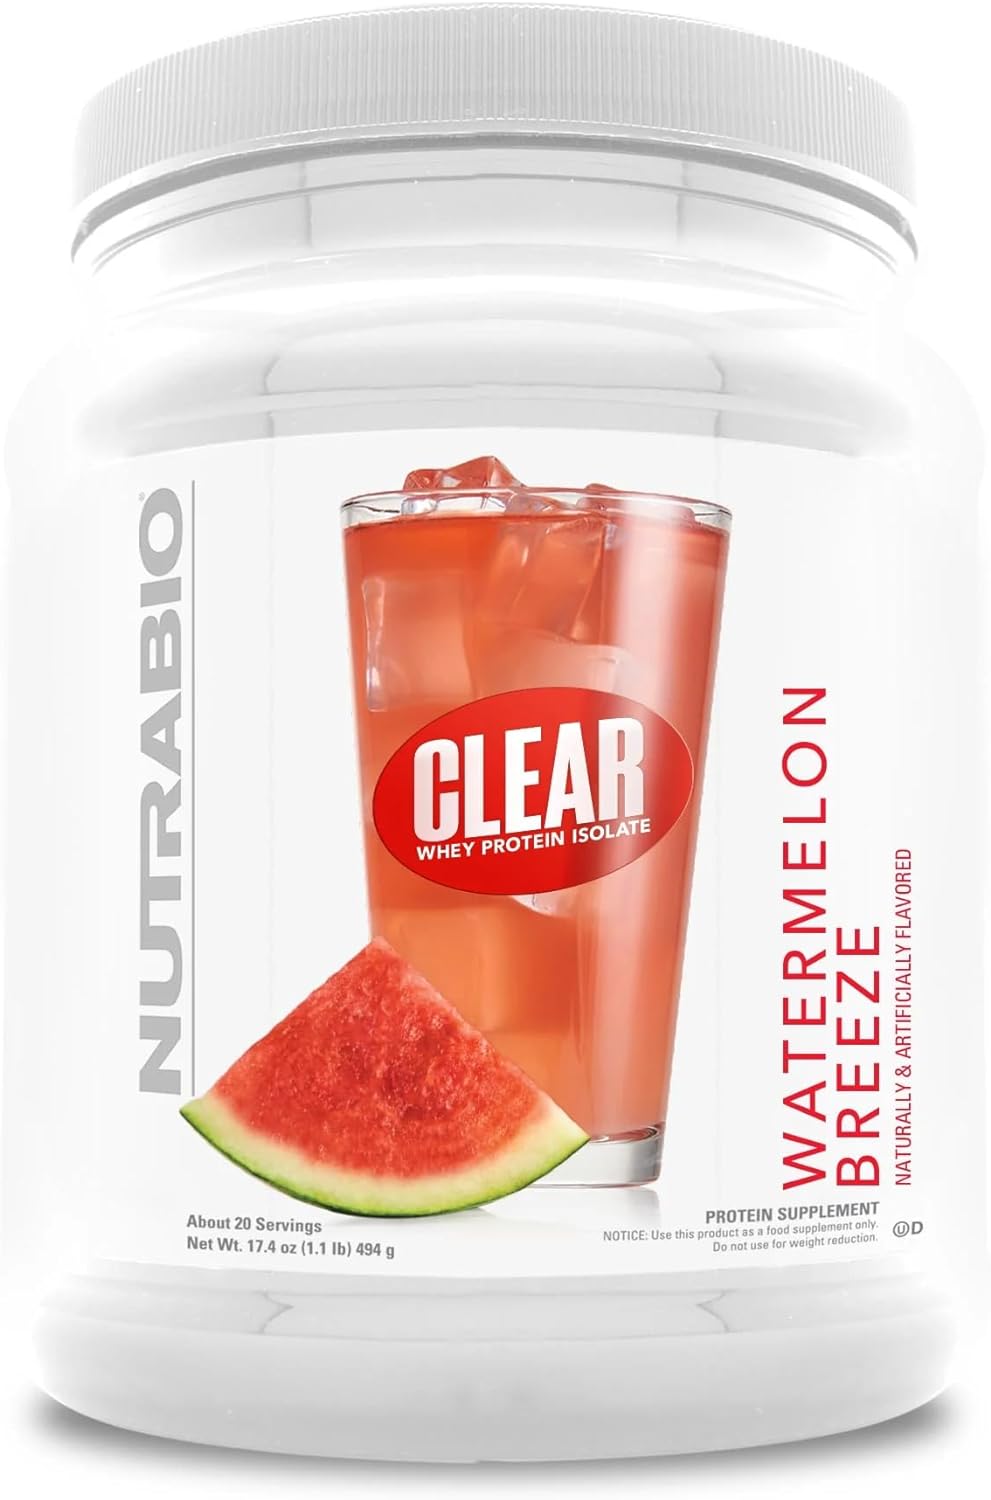 NutraBio Clear Whey Protein Isolate ? Pure Whey Isolate for Men and Women, Delicious Fruit Flavors ? Non-GMO, Zero Lactose ? Watermelon Breeze, 20 Servings